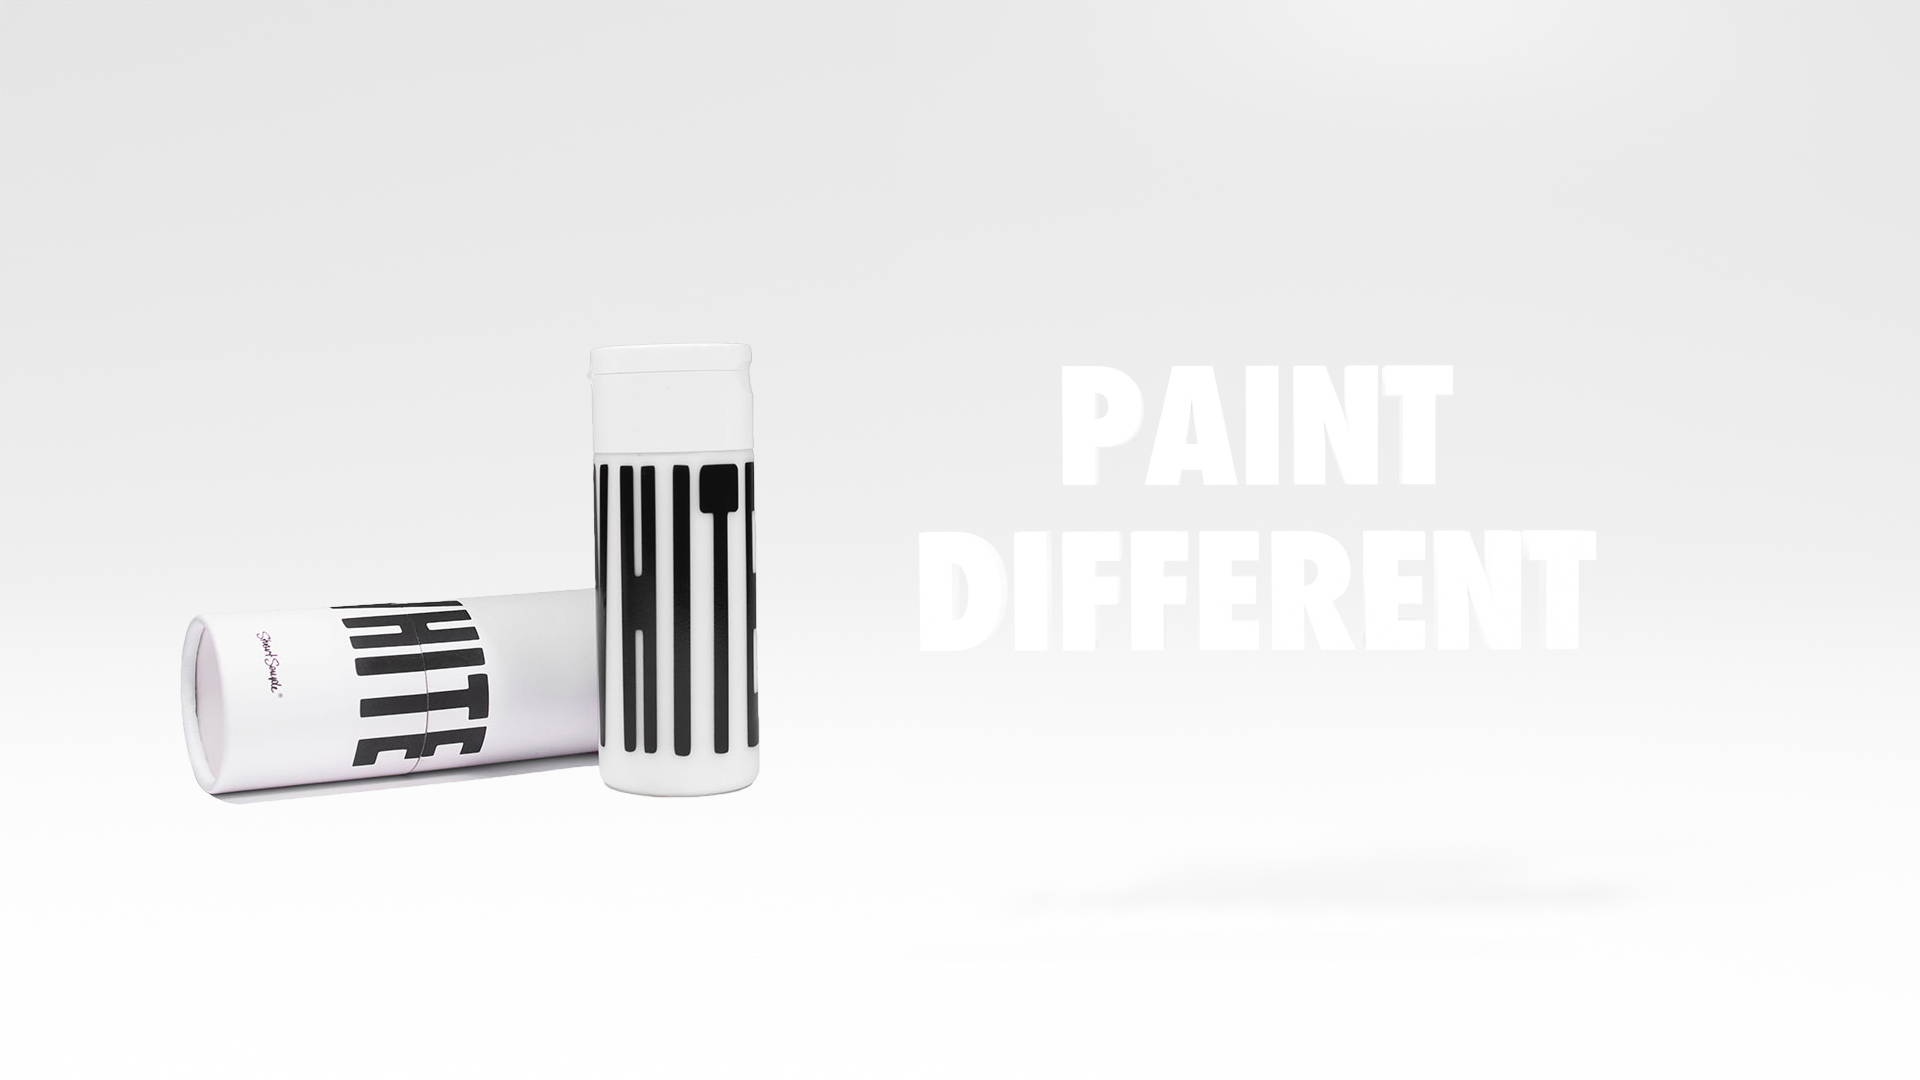 White 2.0 - The World's Brightest White Paint - Acrylic – Culture